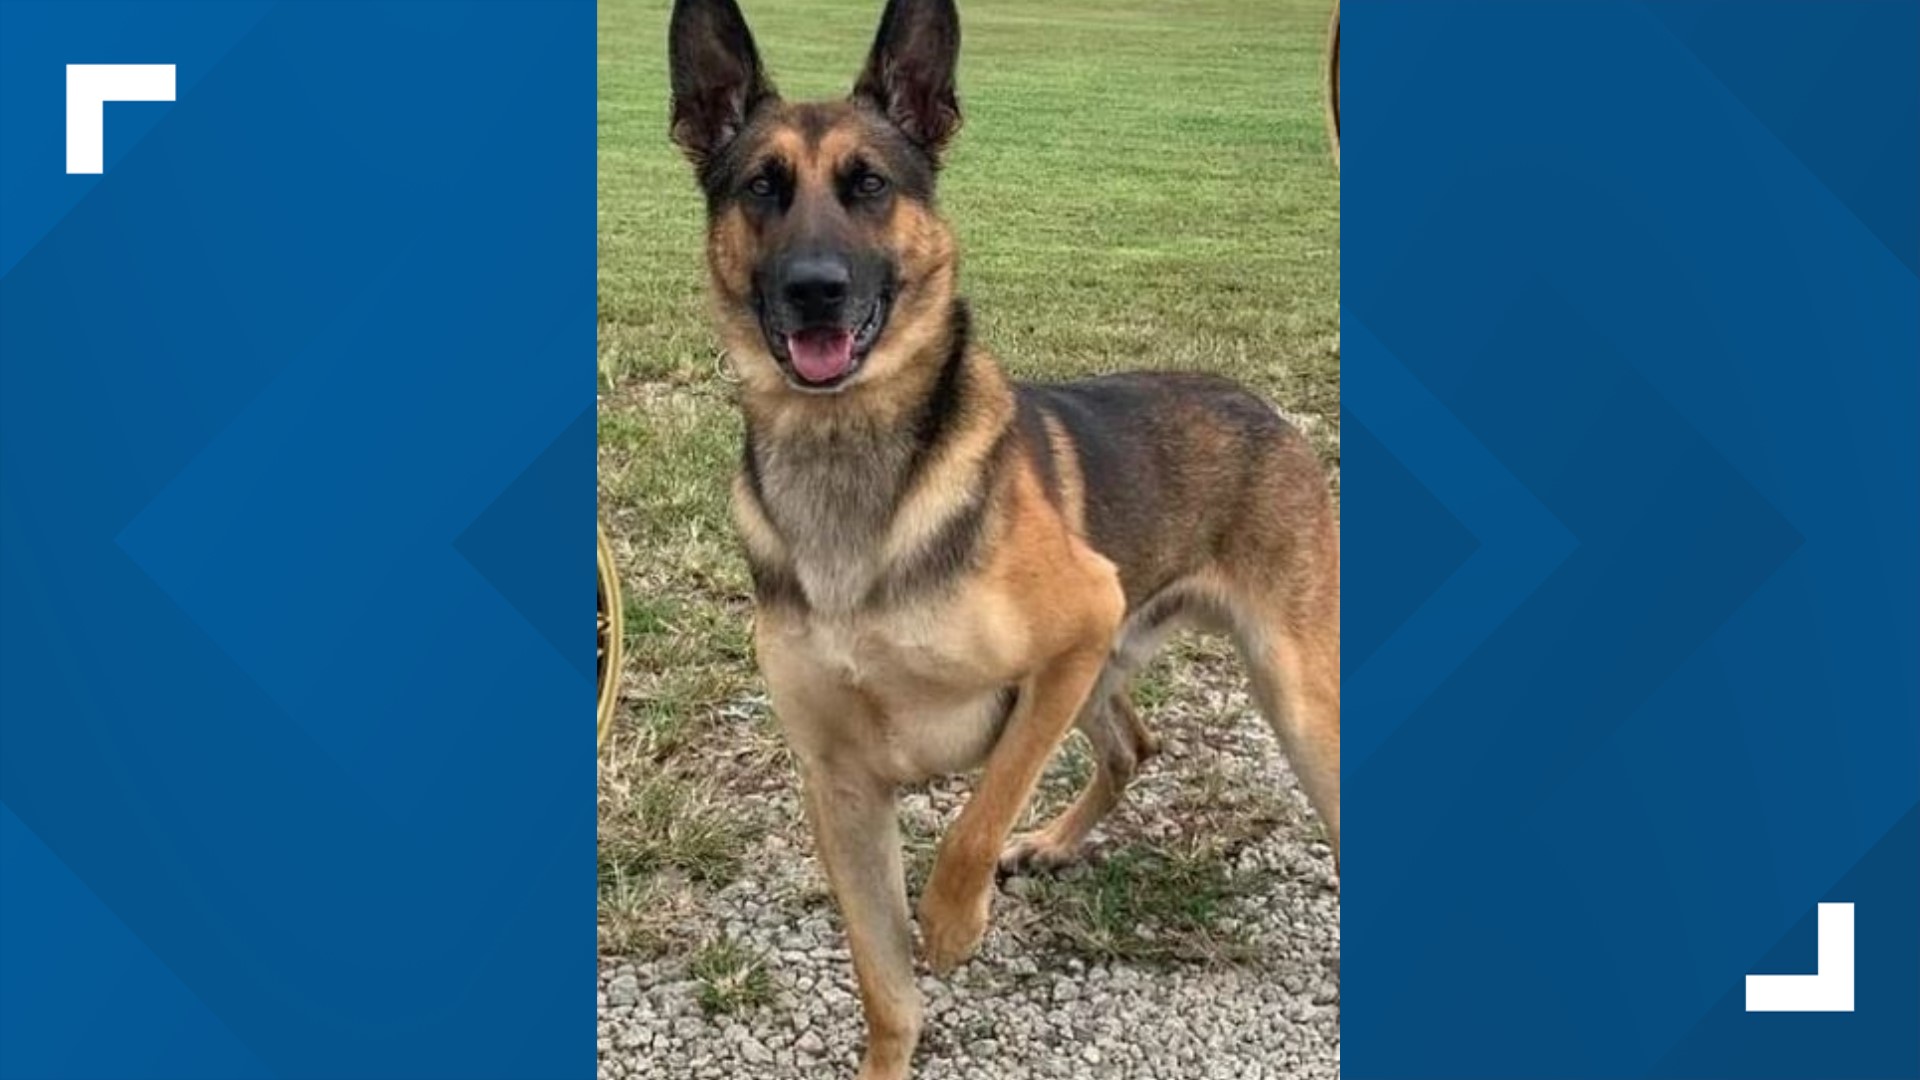 The sheriff's office says K-9 Kilo has made a full recovery after being shot in August.